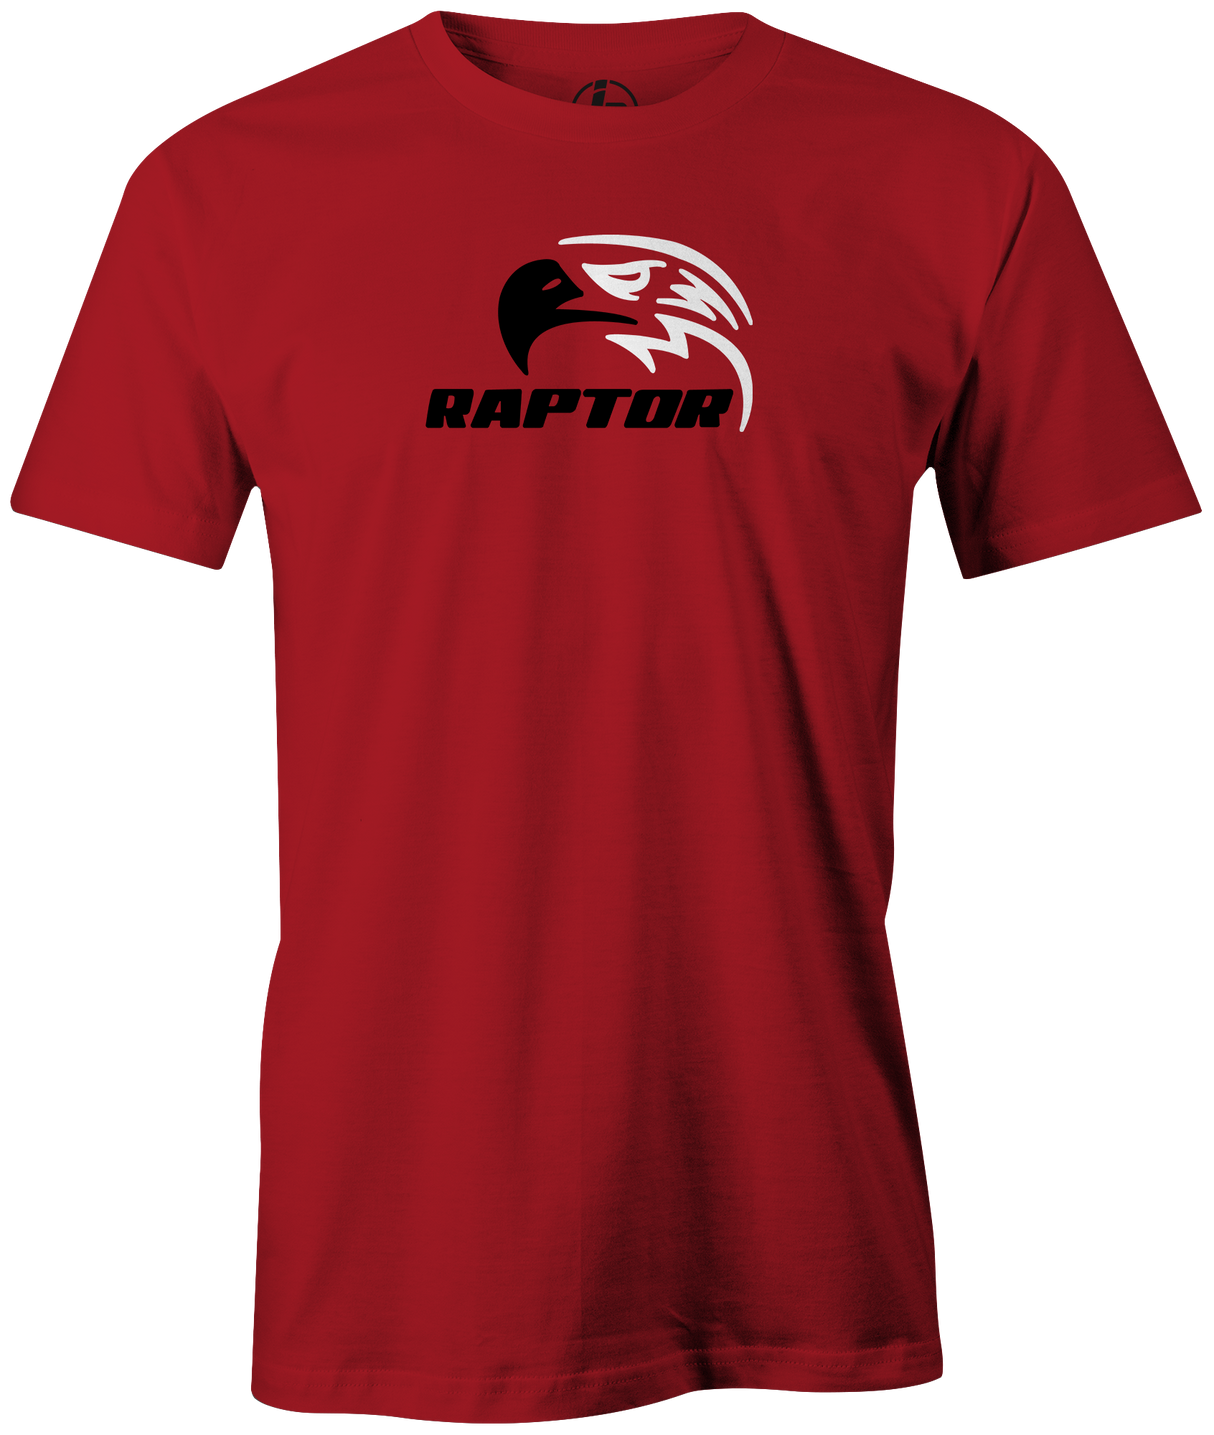 This shirt features the new MOTIV Raptor Fury bowling ball logo found on Motiv Bowling's newest release. Available in dark red. T-shirts tee shirts bowling shirt jersey league tournament pba ej tackett. a great practice shirt when you hit the lanes! Aj johnson, Dick Allen, THB